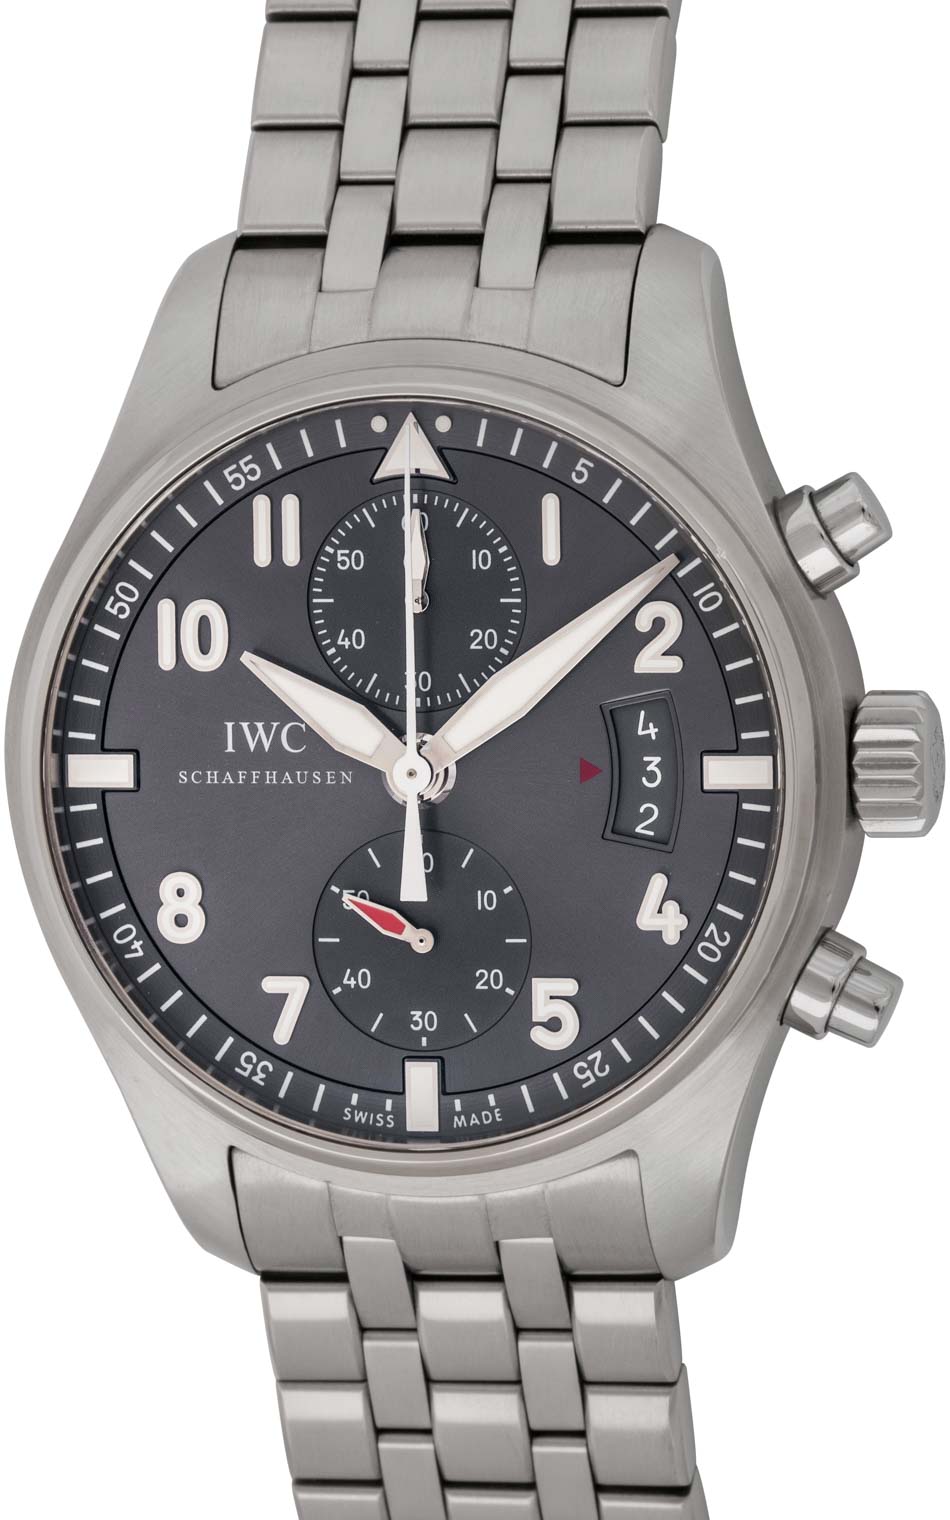 IWC - Spitfire Flyback Chronograph